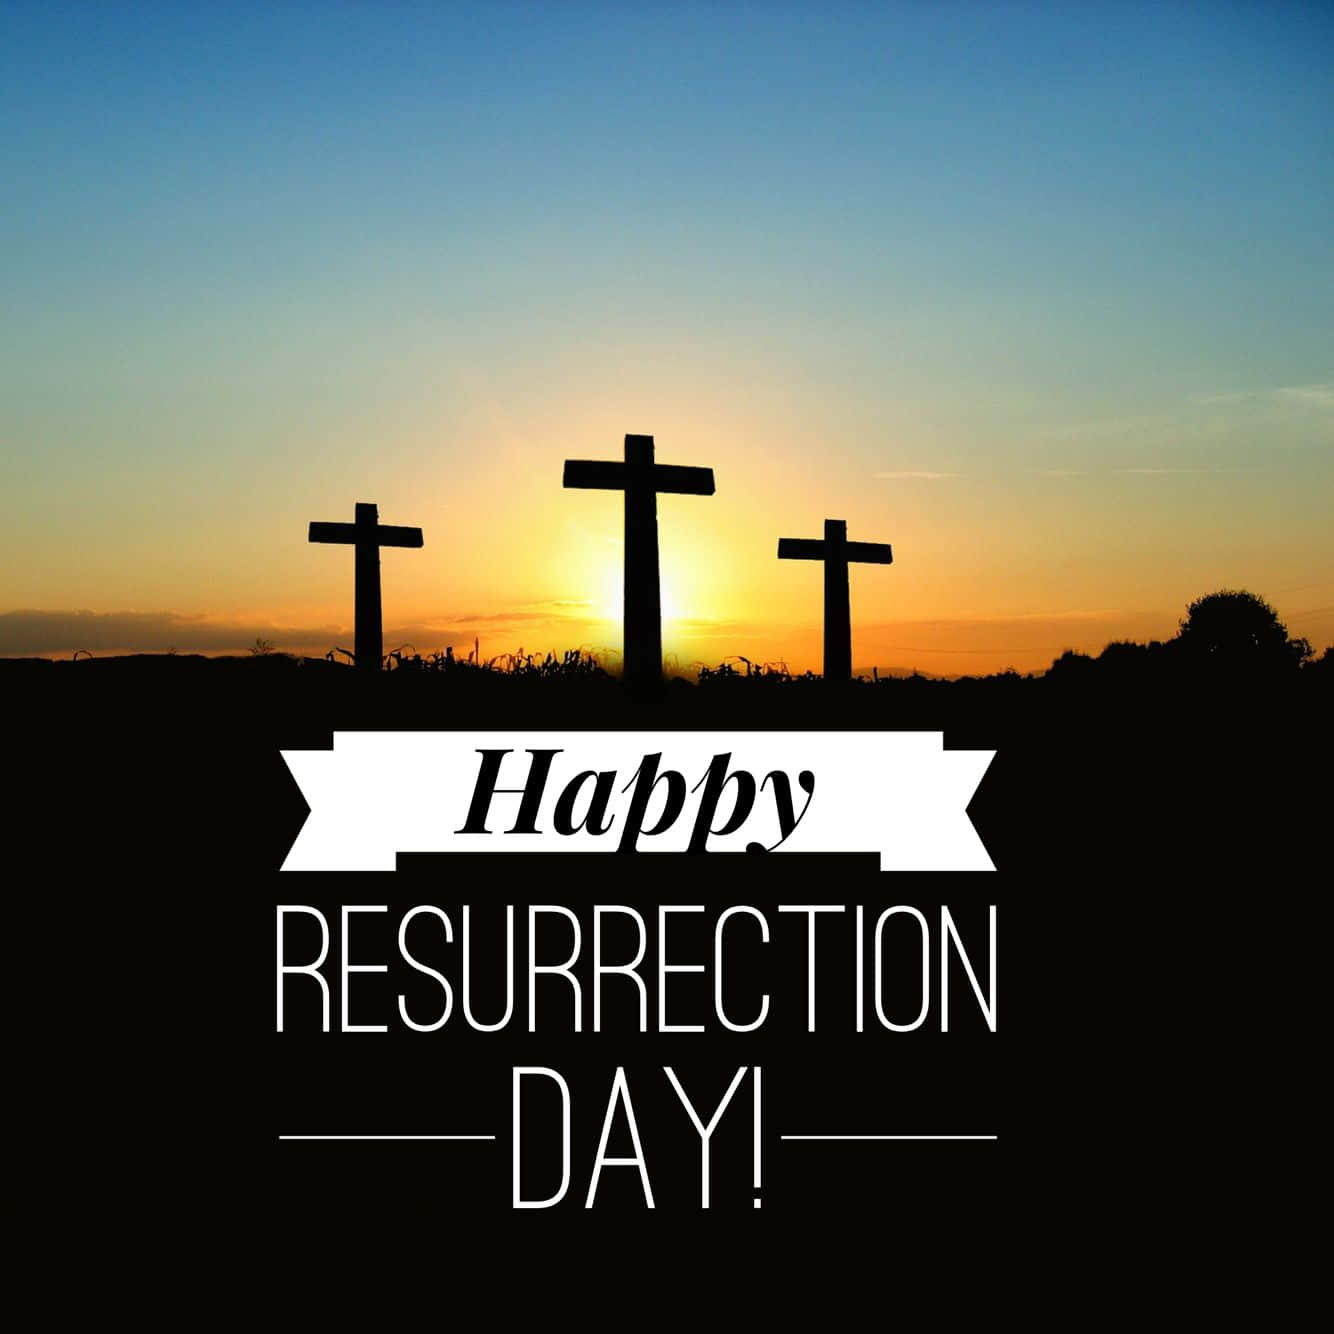 Belief in the Resurrection is one of the main teachings of Christianity